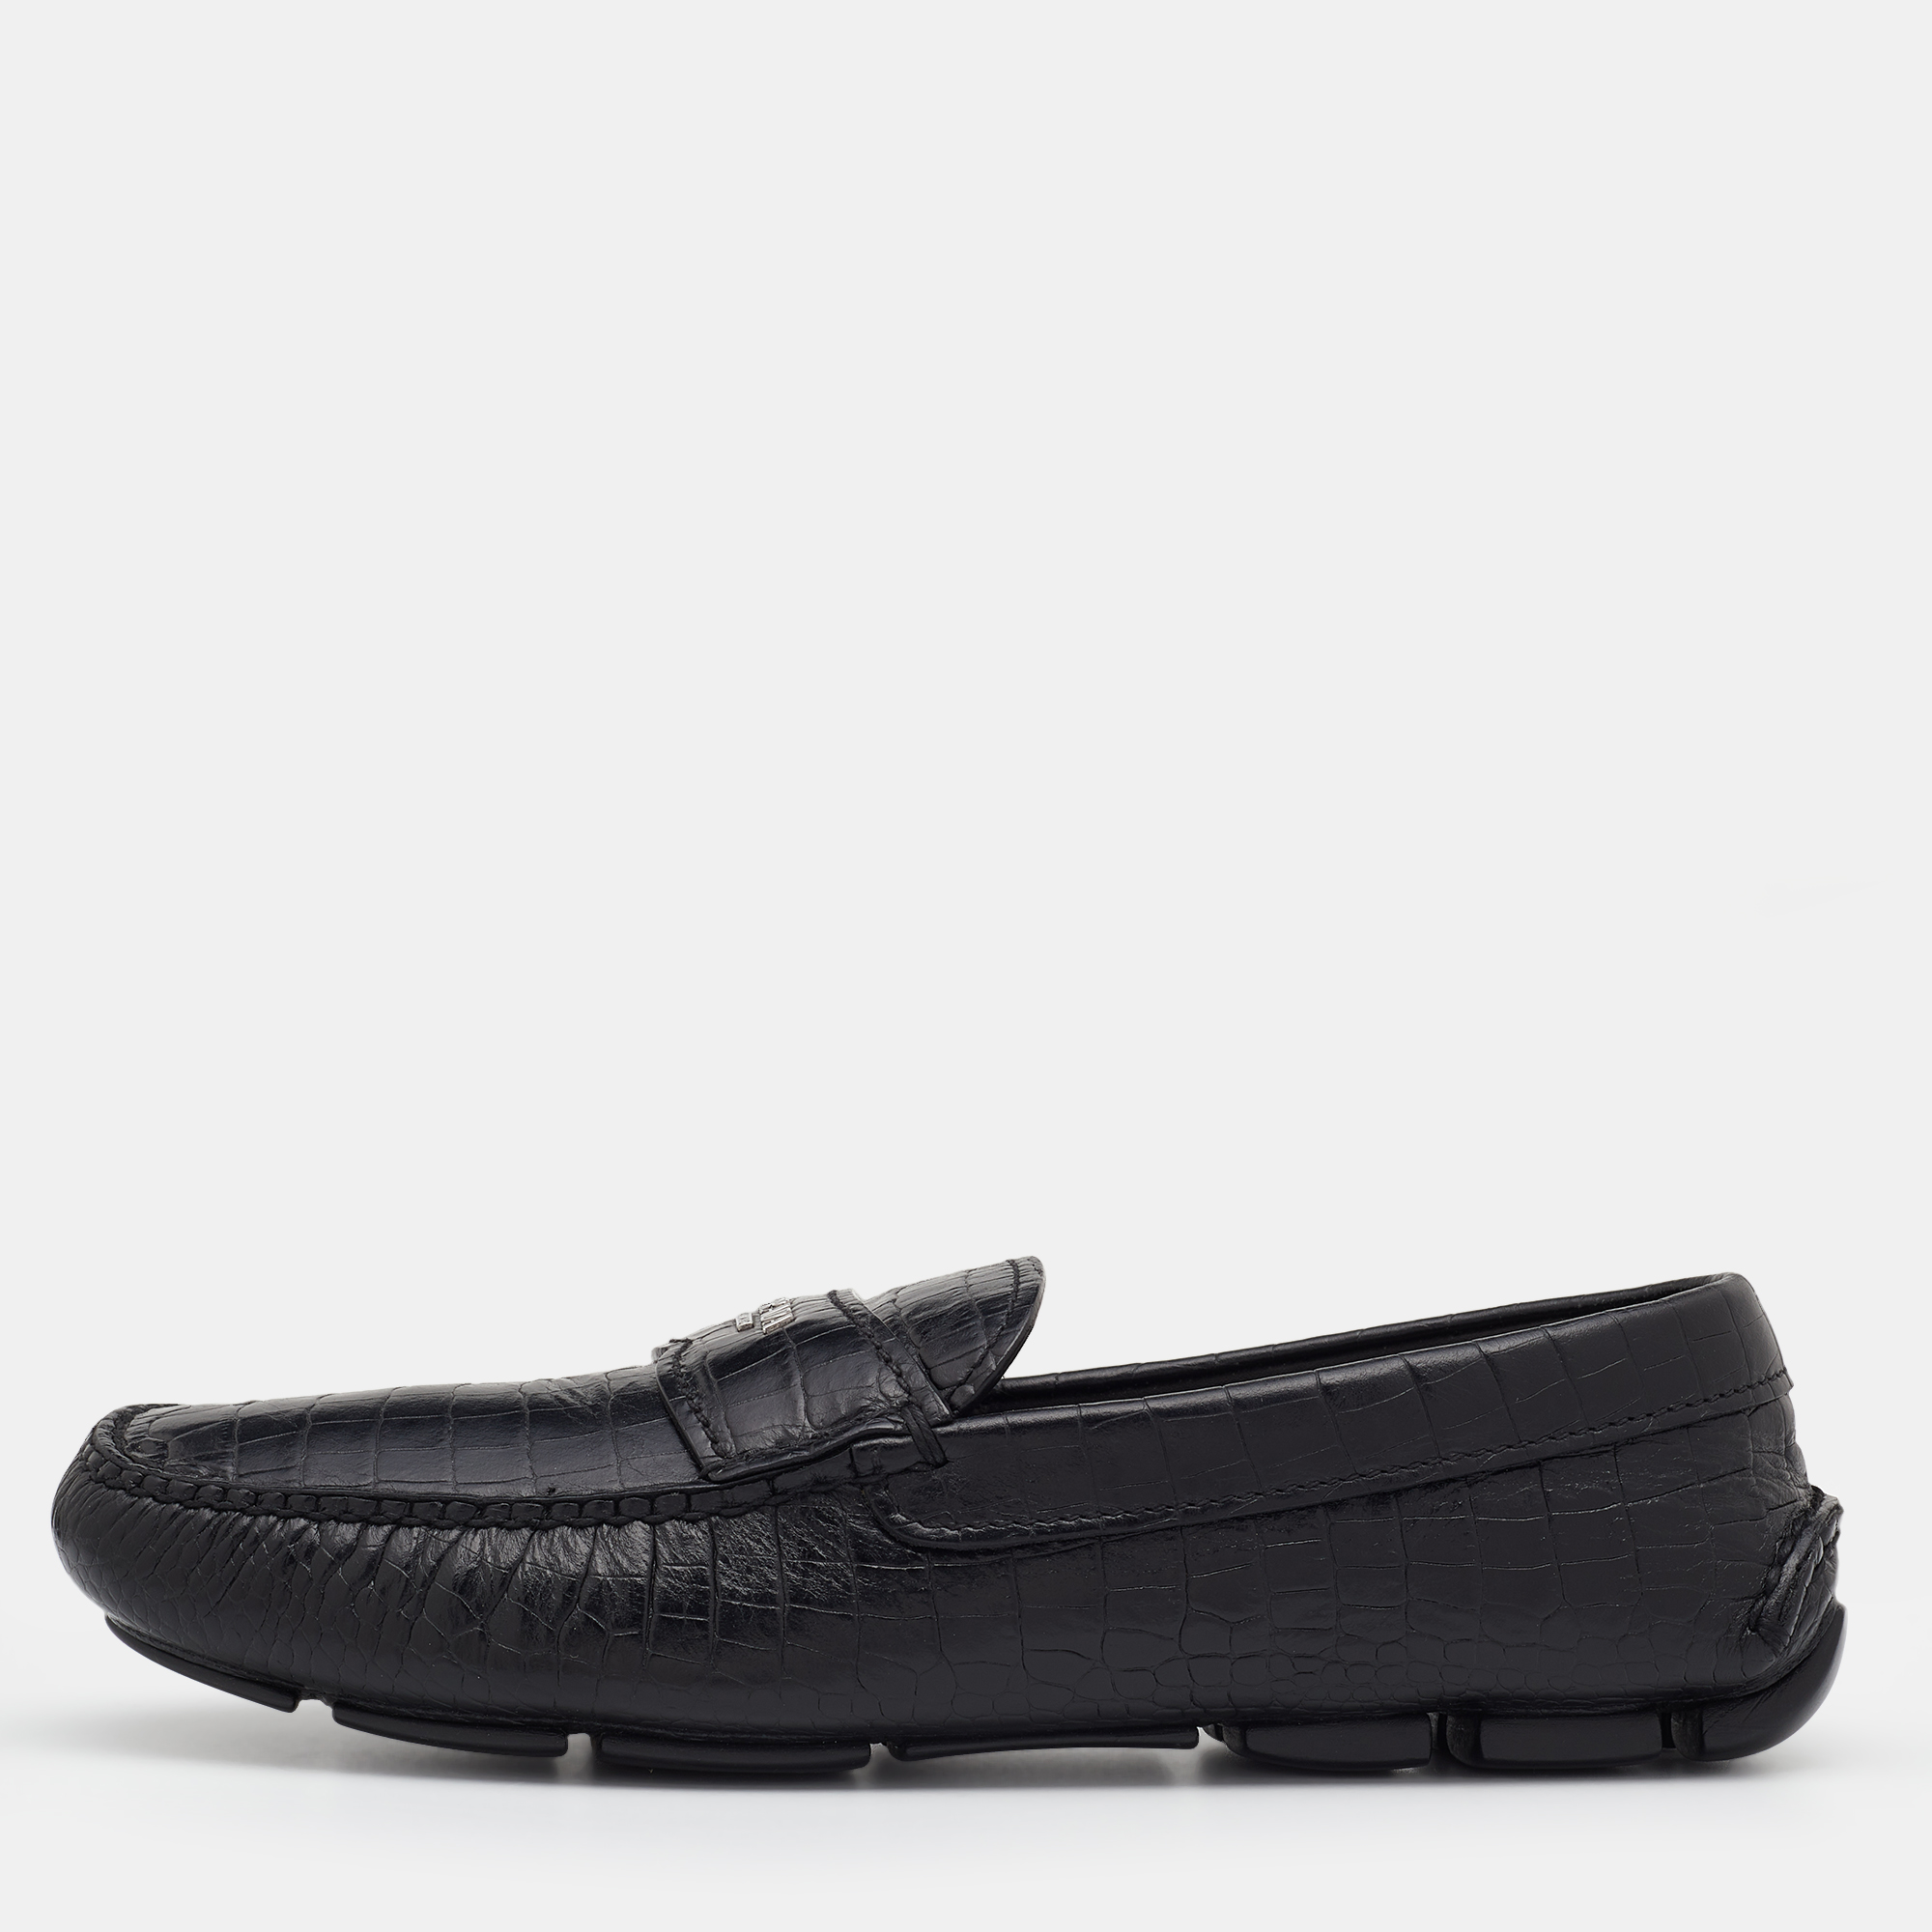 Pre-owned Prada Black Croc Embossed Leather Penny Slip On Loafers Size 39.5